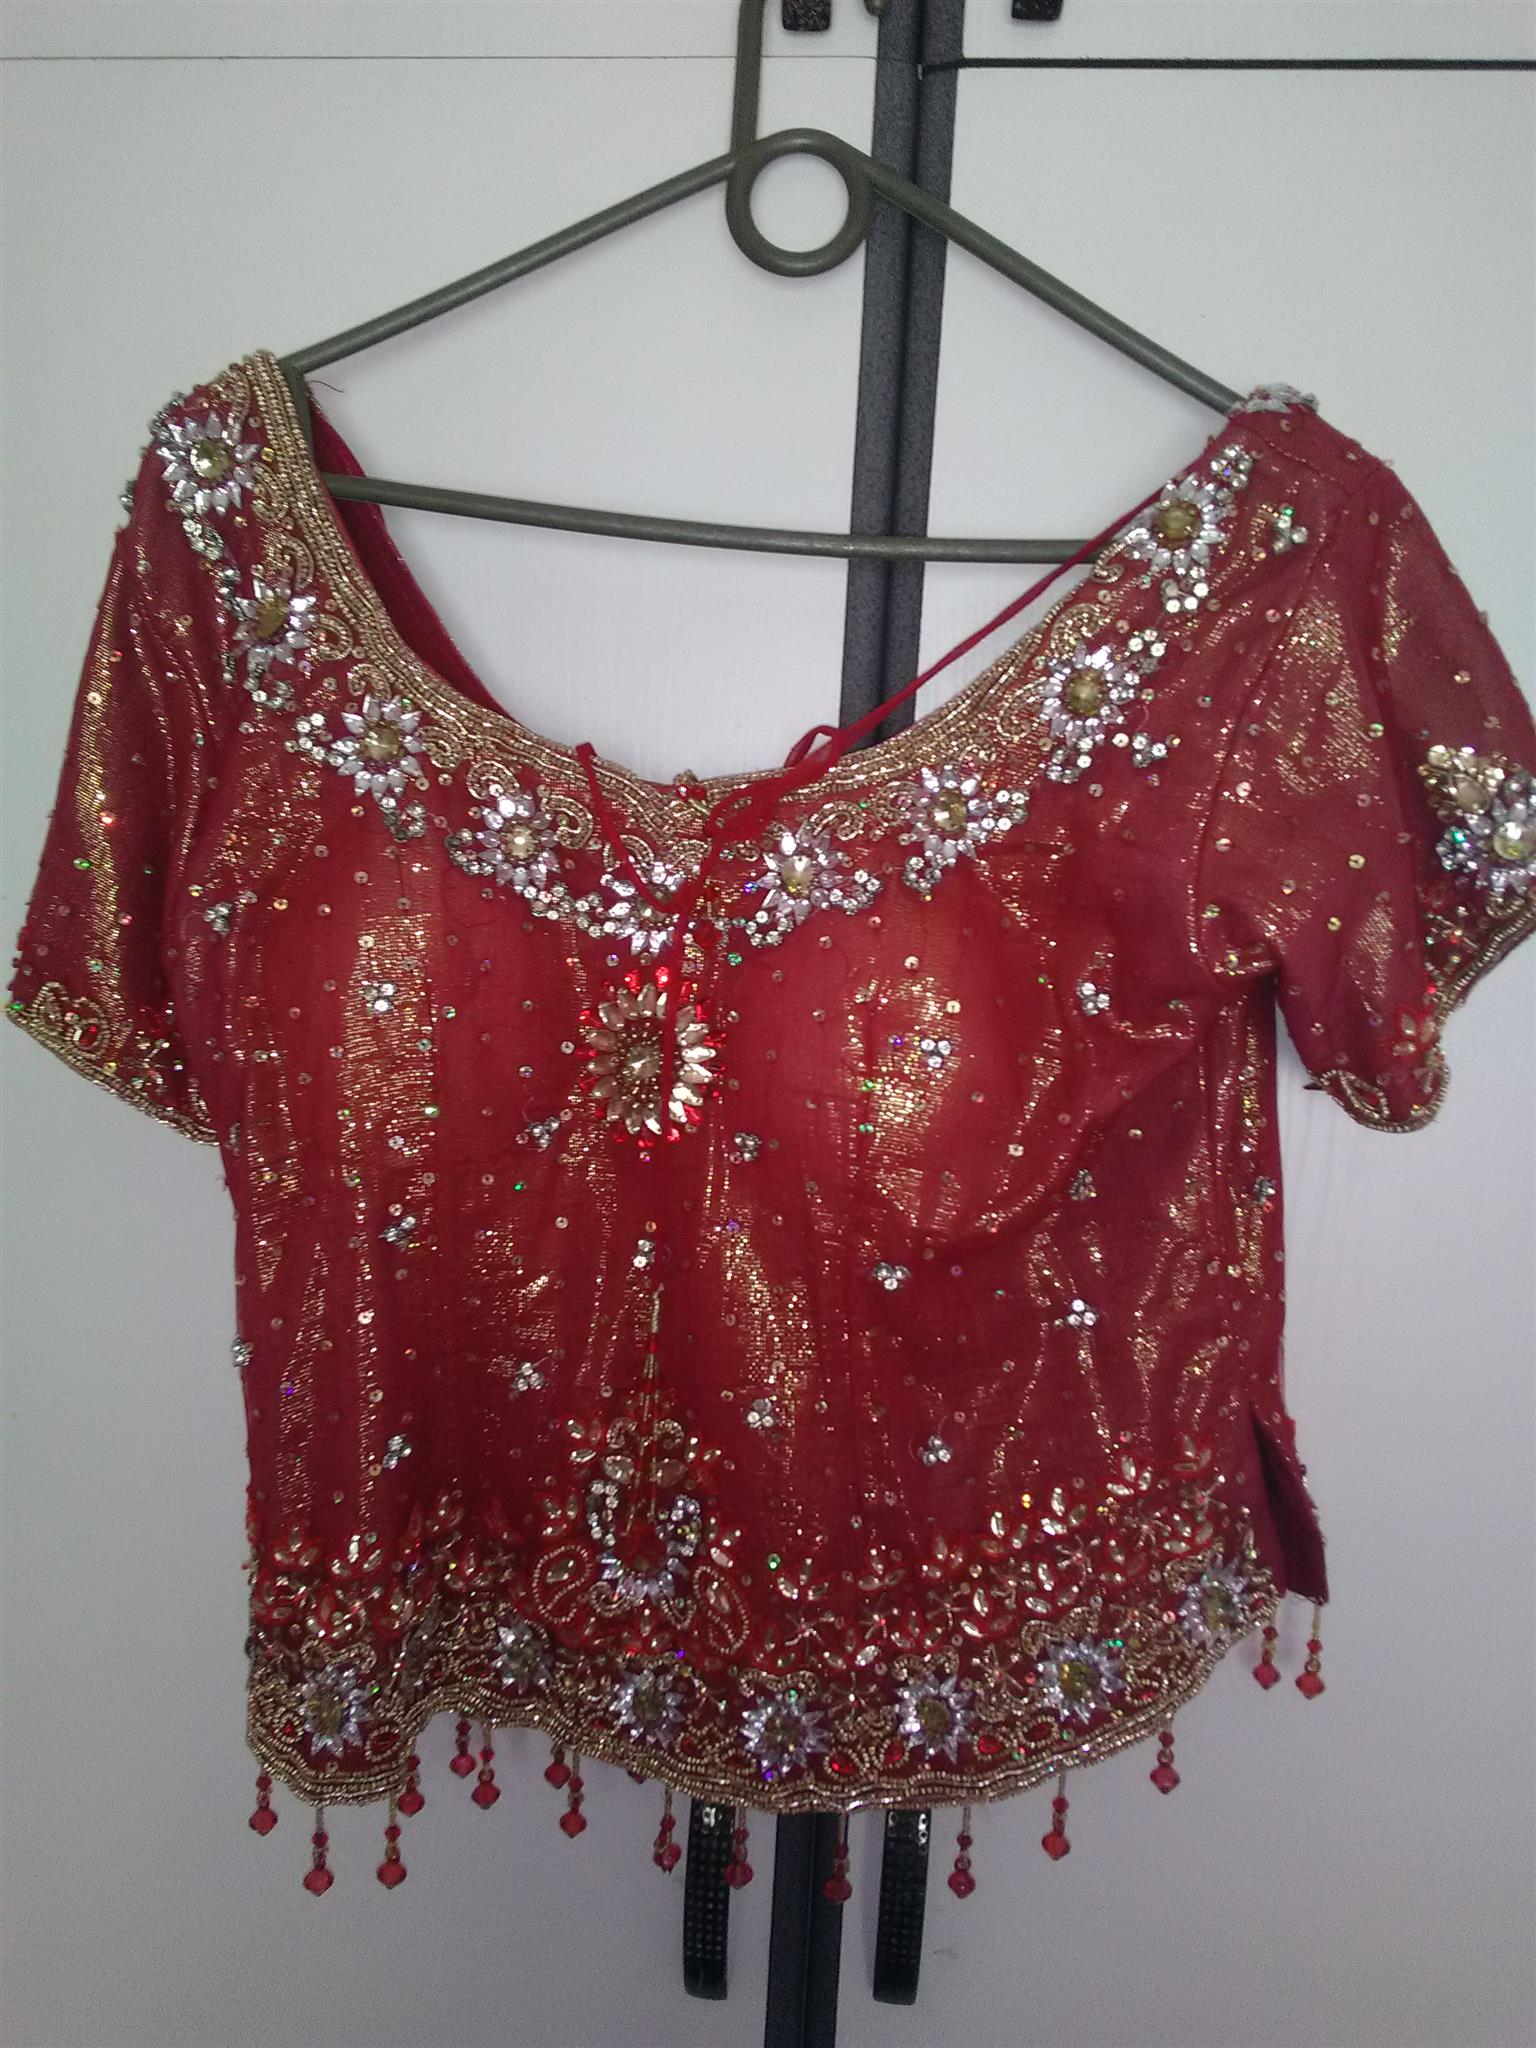 RED MERMAID STYLE GARARA SIZE 34 FOR SALE